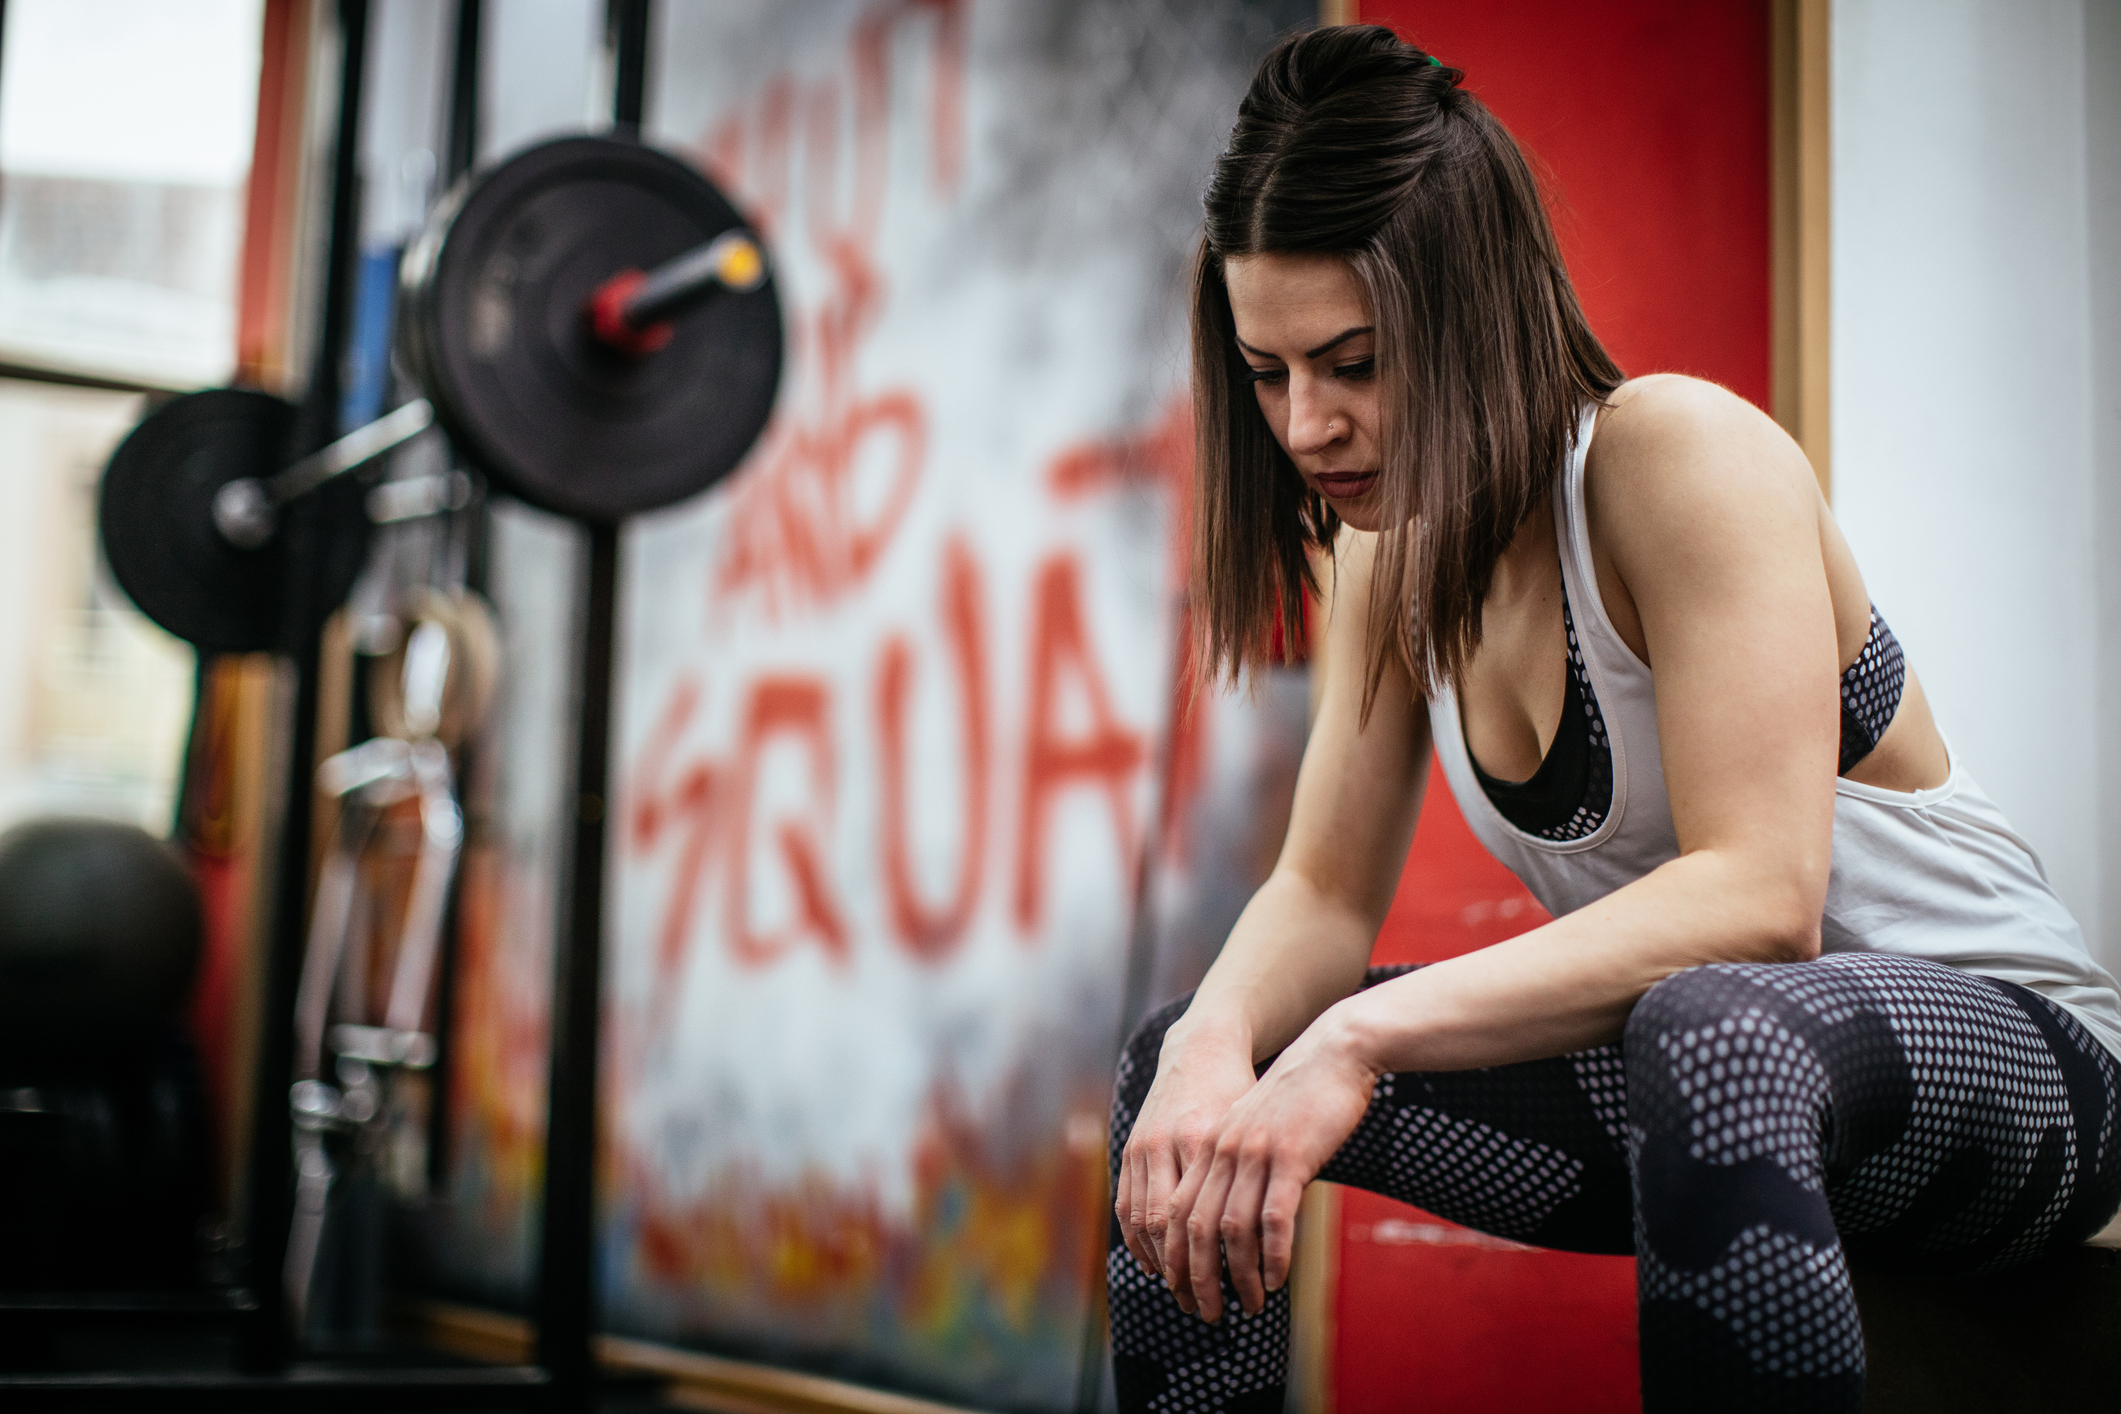 Workouts starting to suck? Dealing with chronic health issues while training hard? These 8 common symptoms will tell you if you're overtraining.